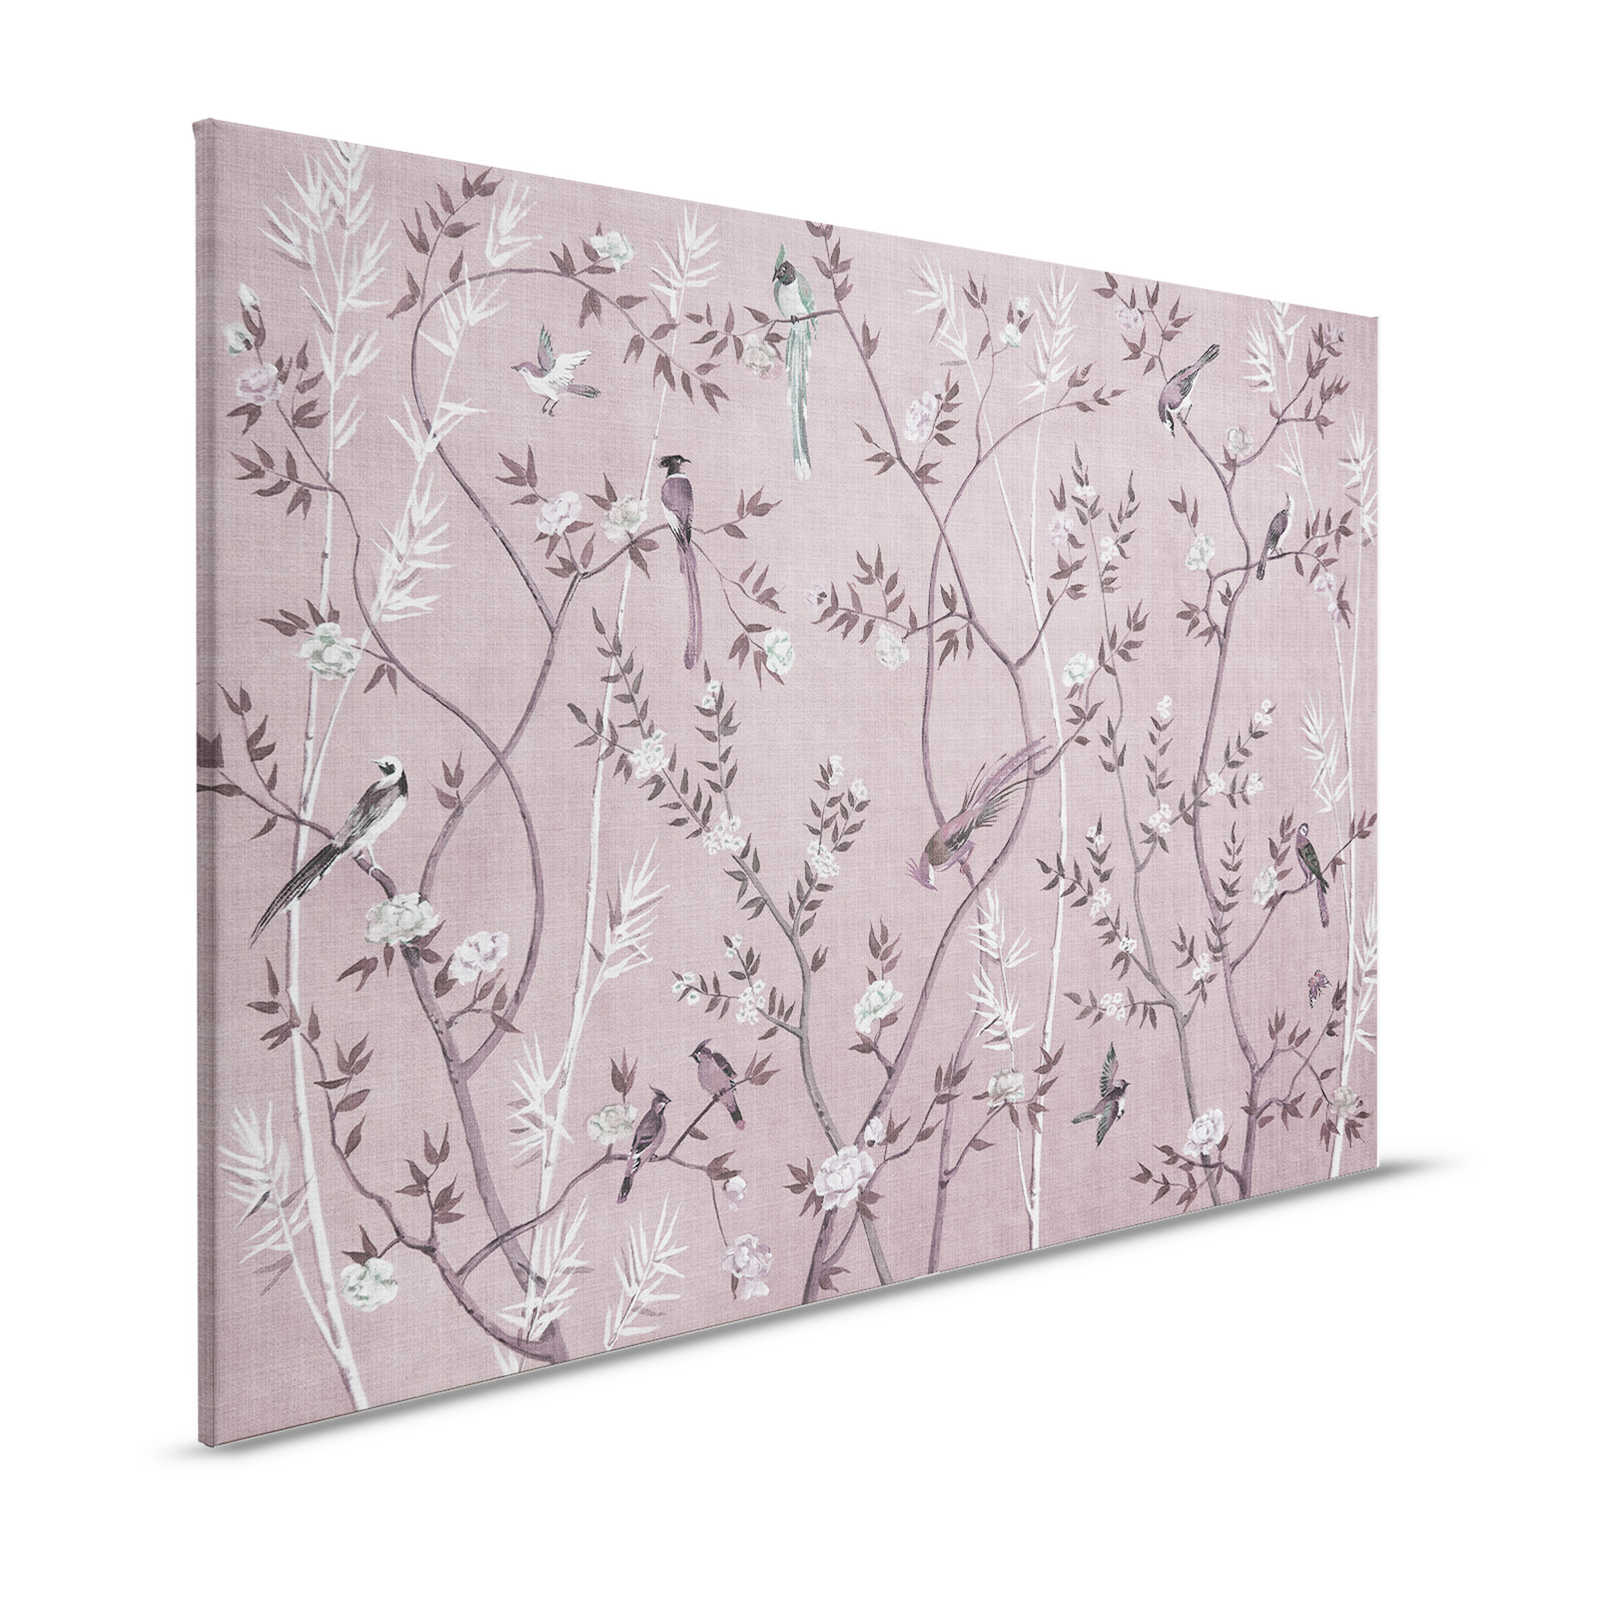 Tea Room 3 - Canvas painting Birds & Blossoms Design in Pink & White - 1.20 m x 0.80 m
